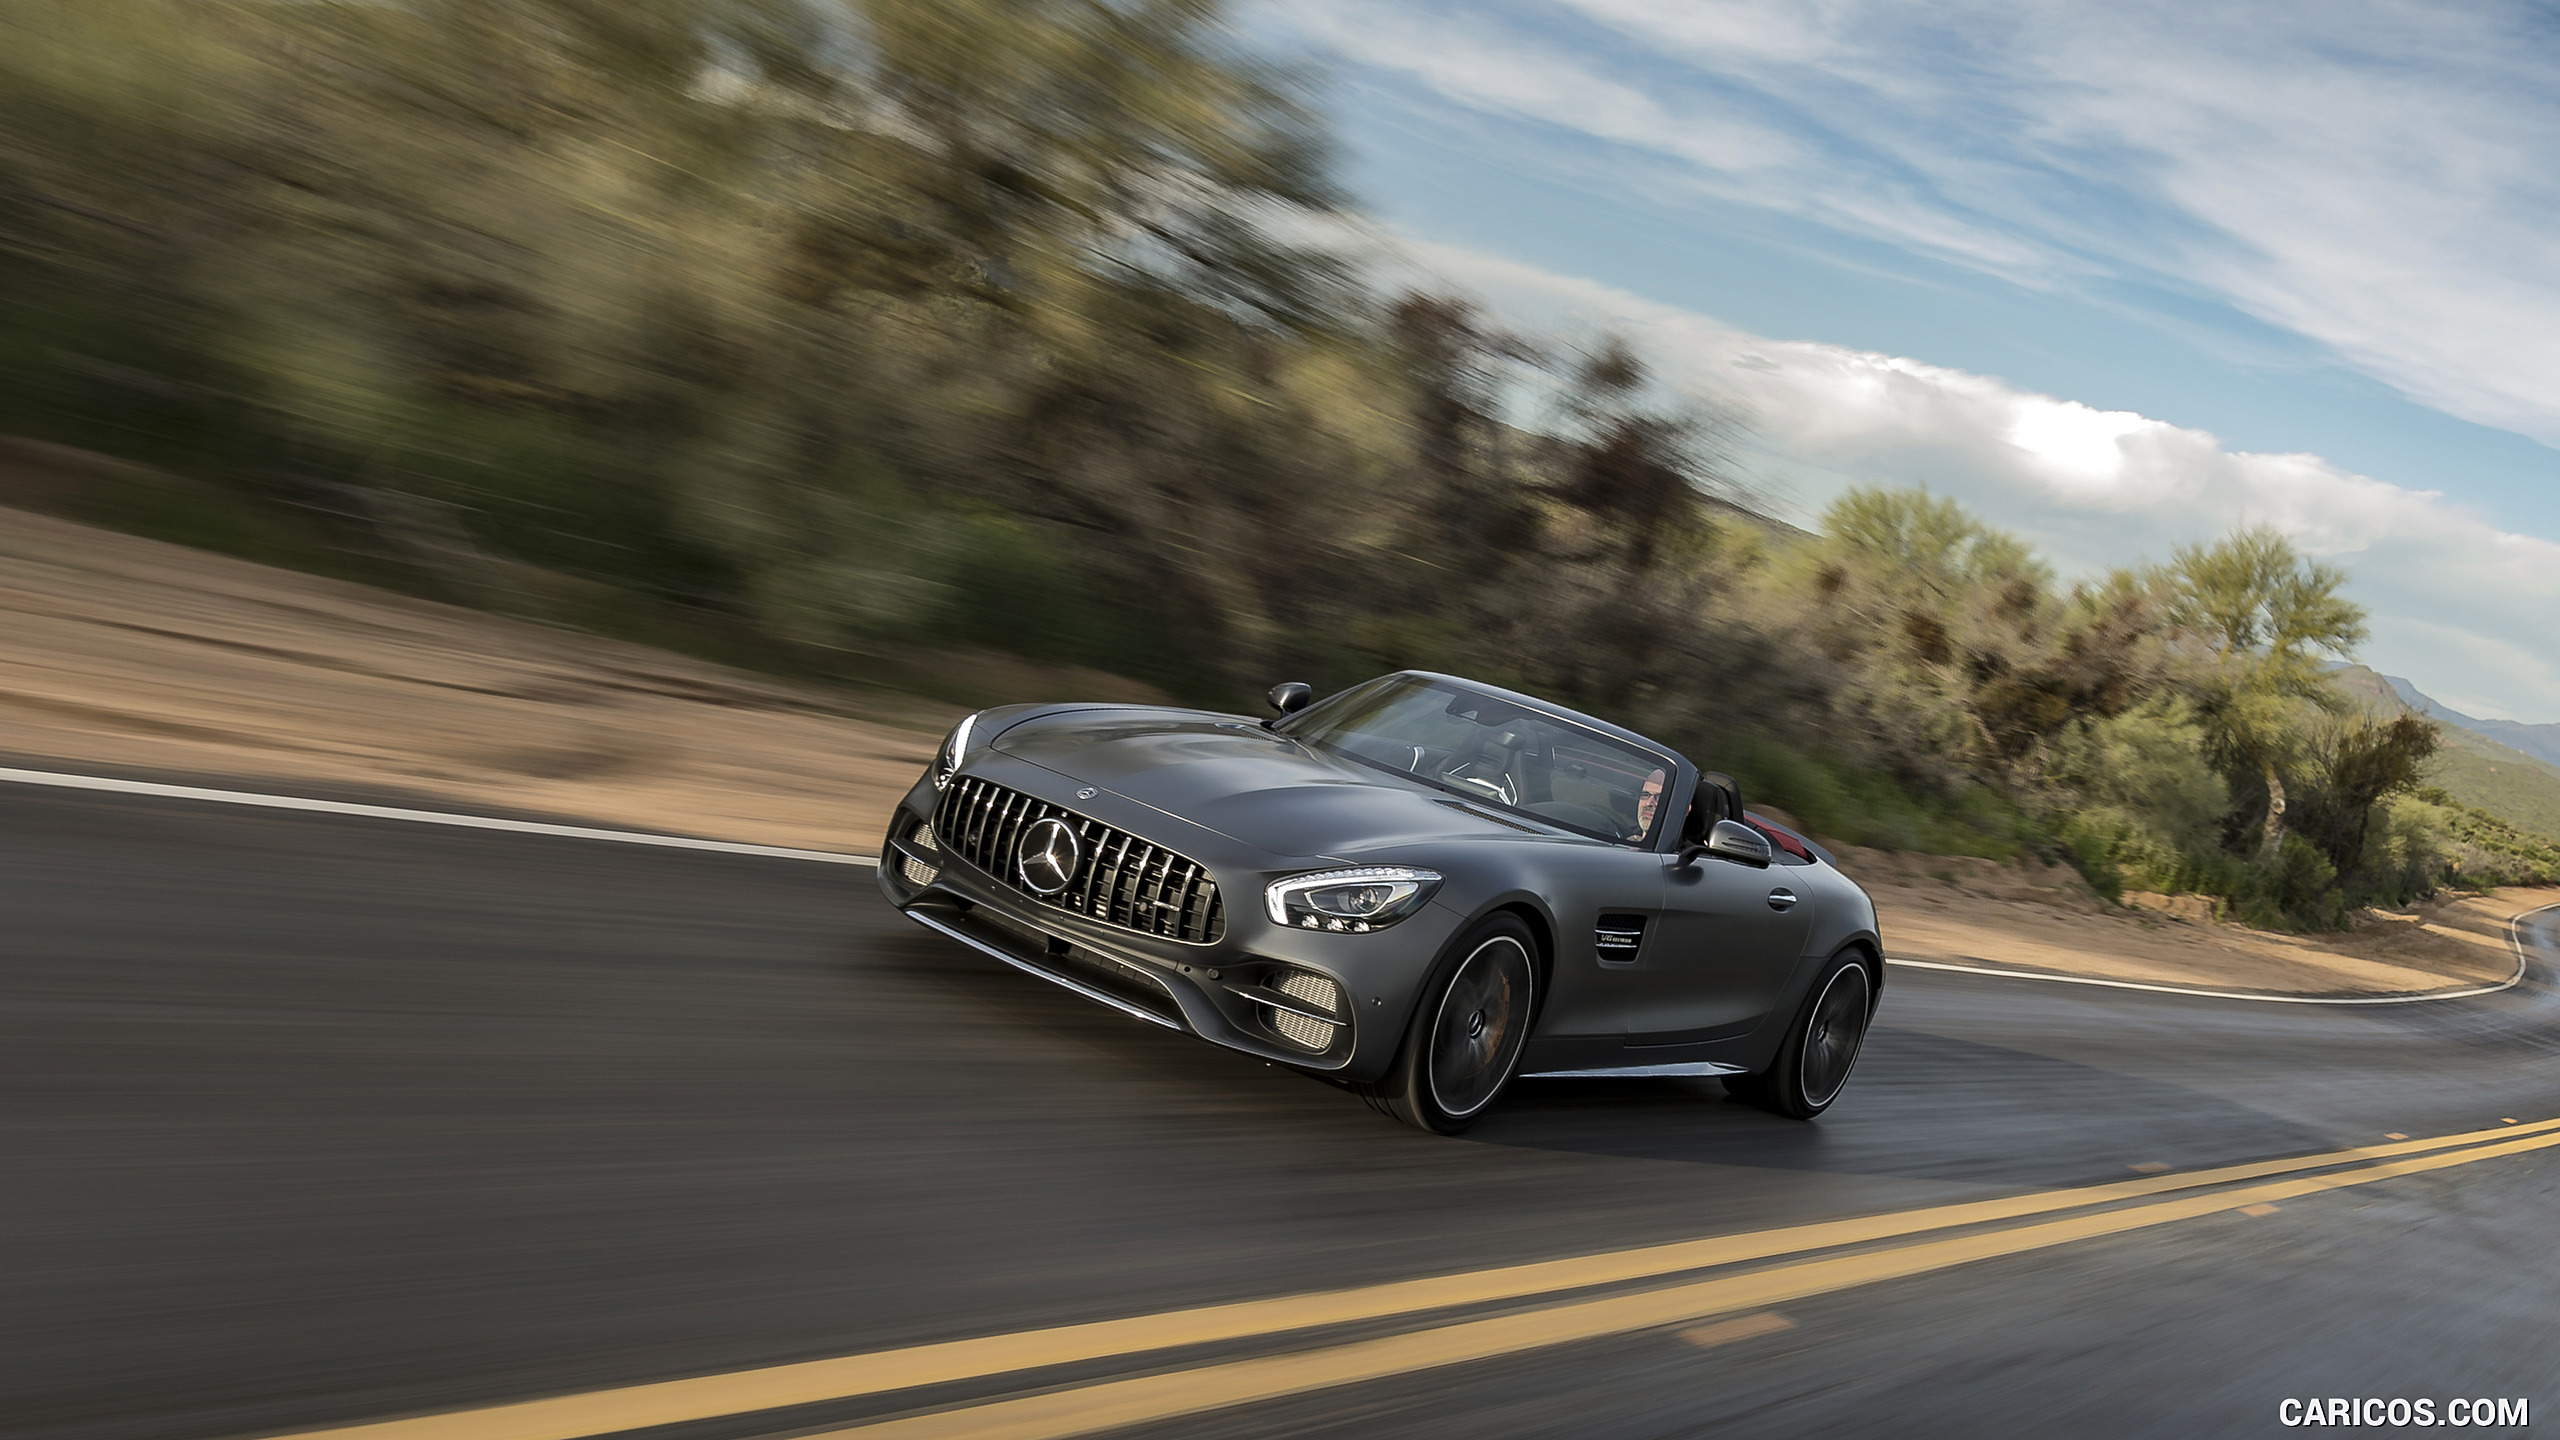 2018 Mercedes-AMG GT C Roadster - Front Three-Quarter, #296 of 350